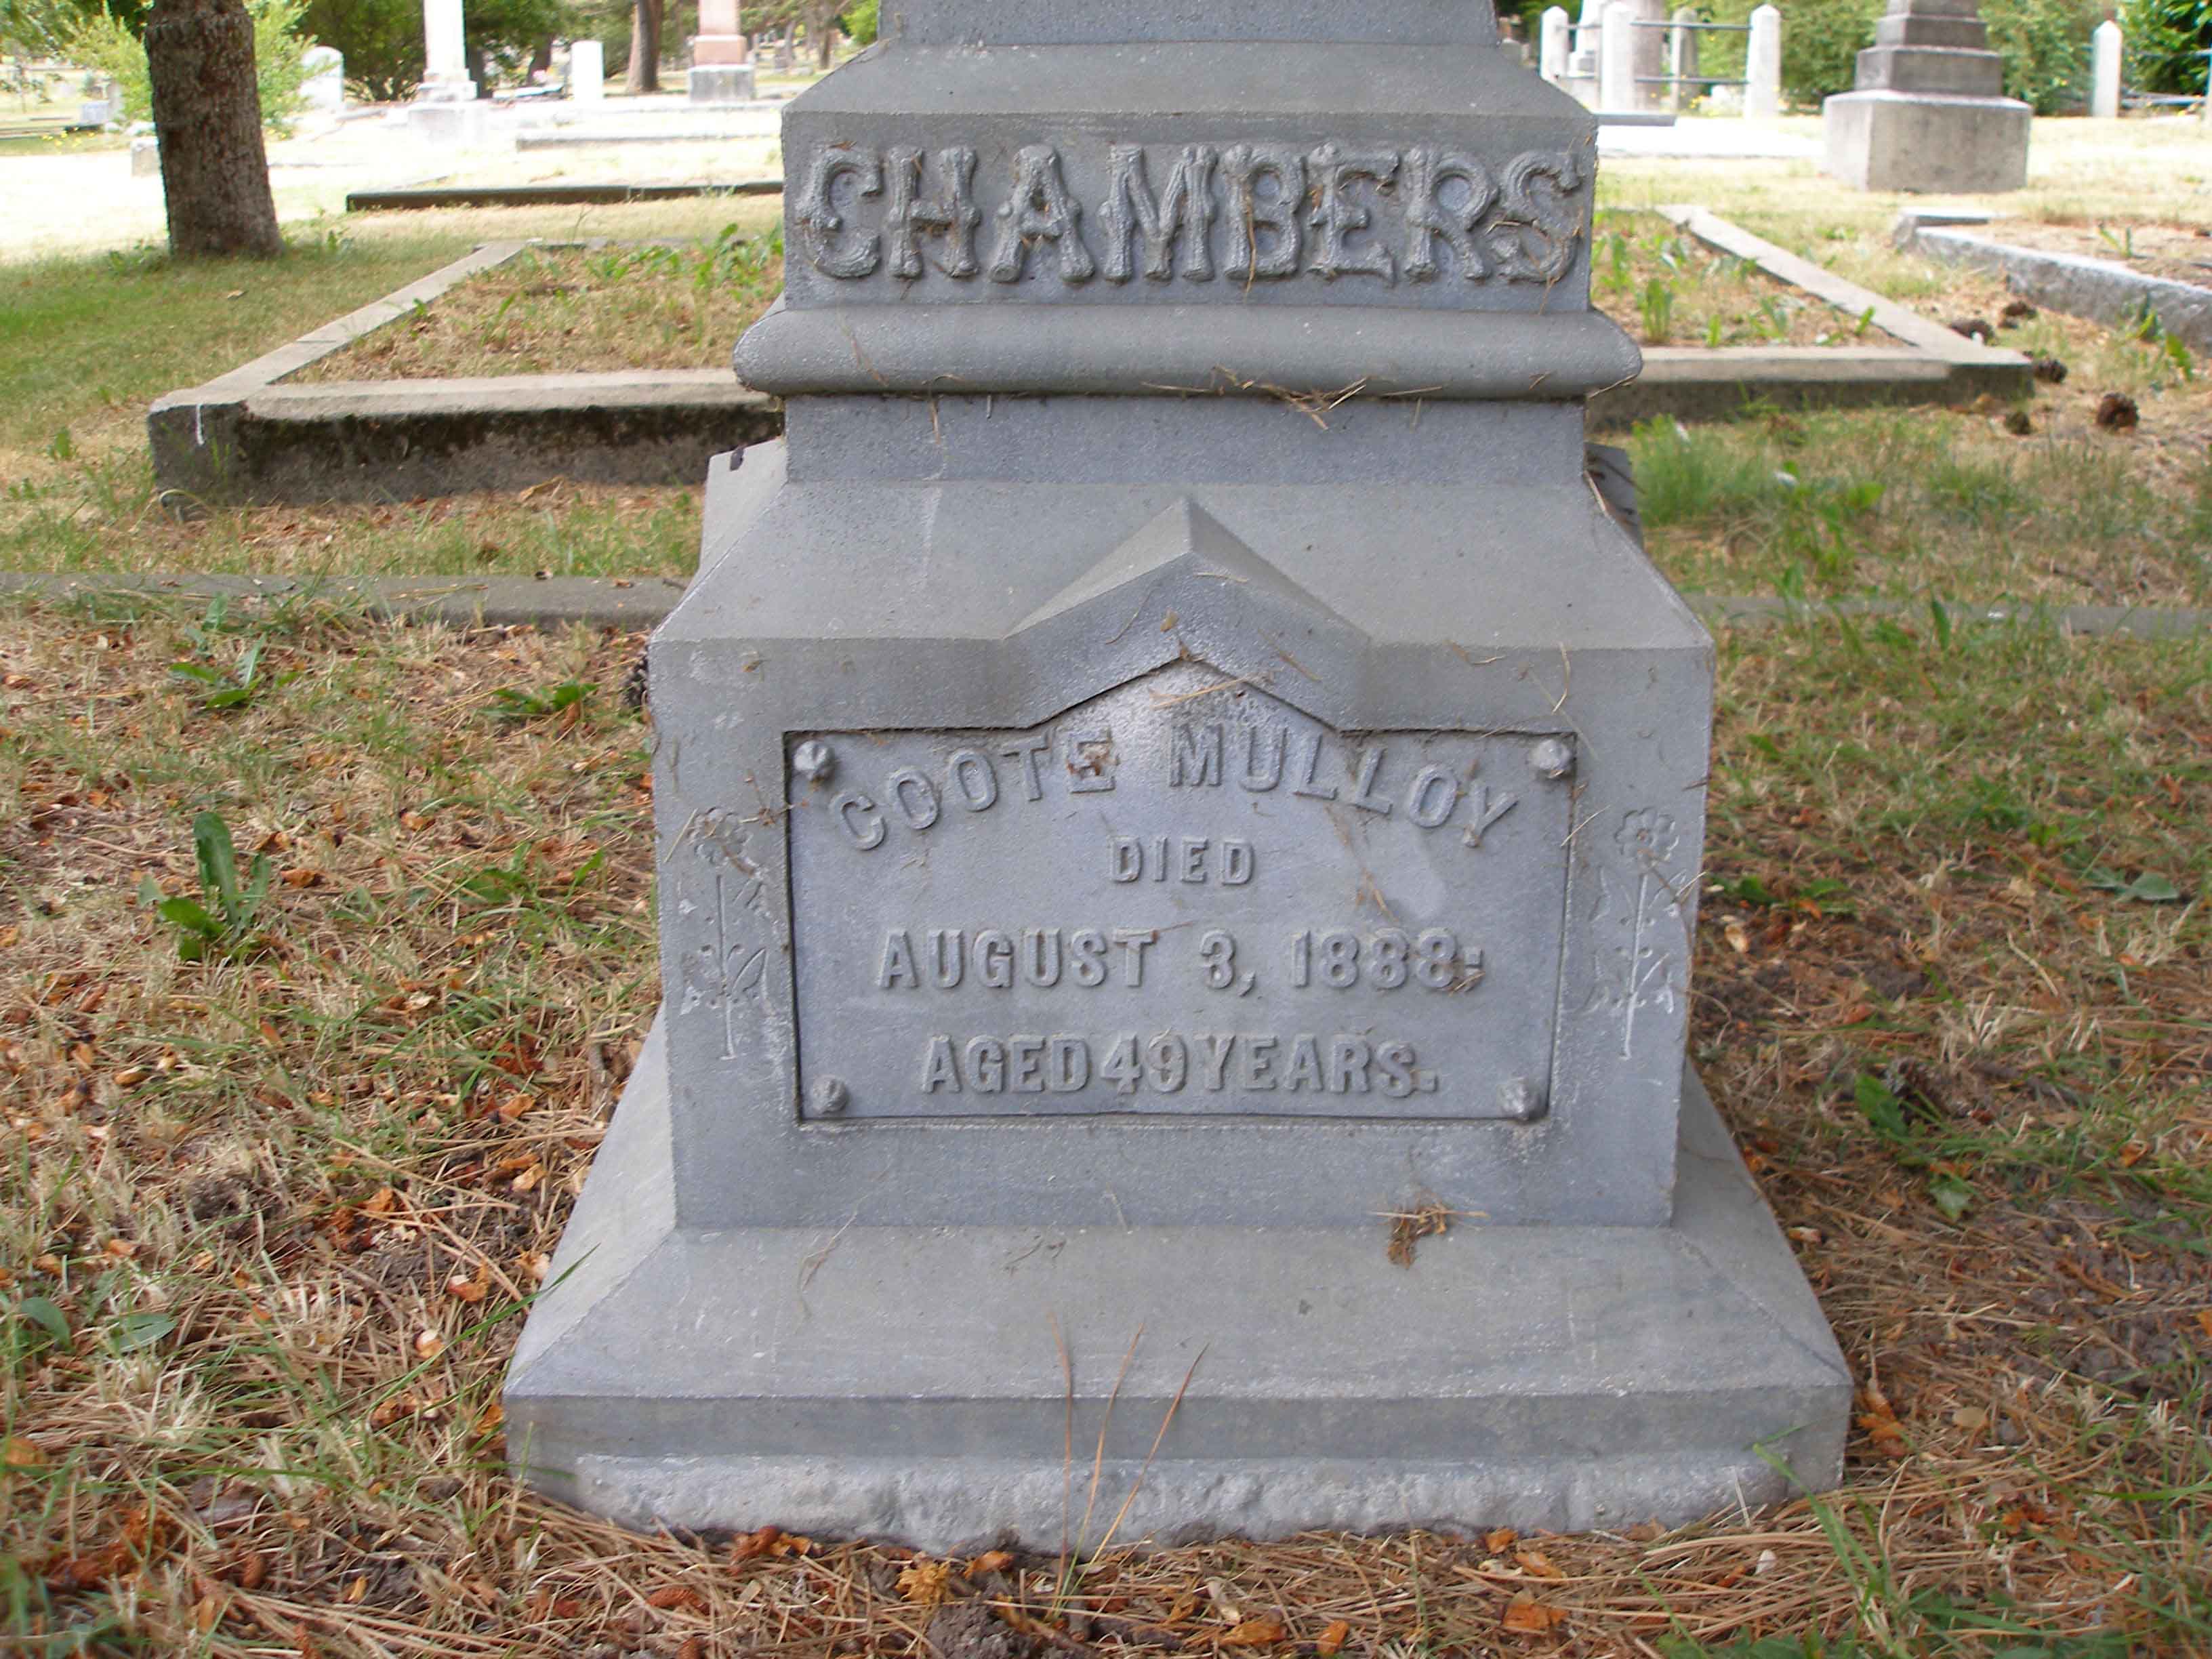 Coote Mulloy Chambers tomb inscription